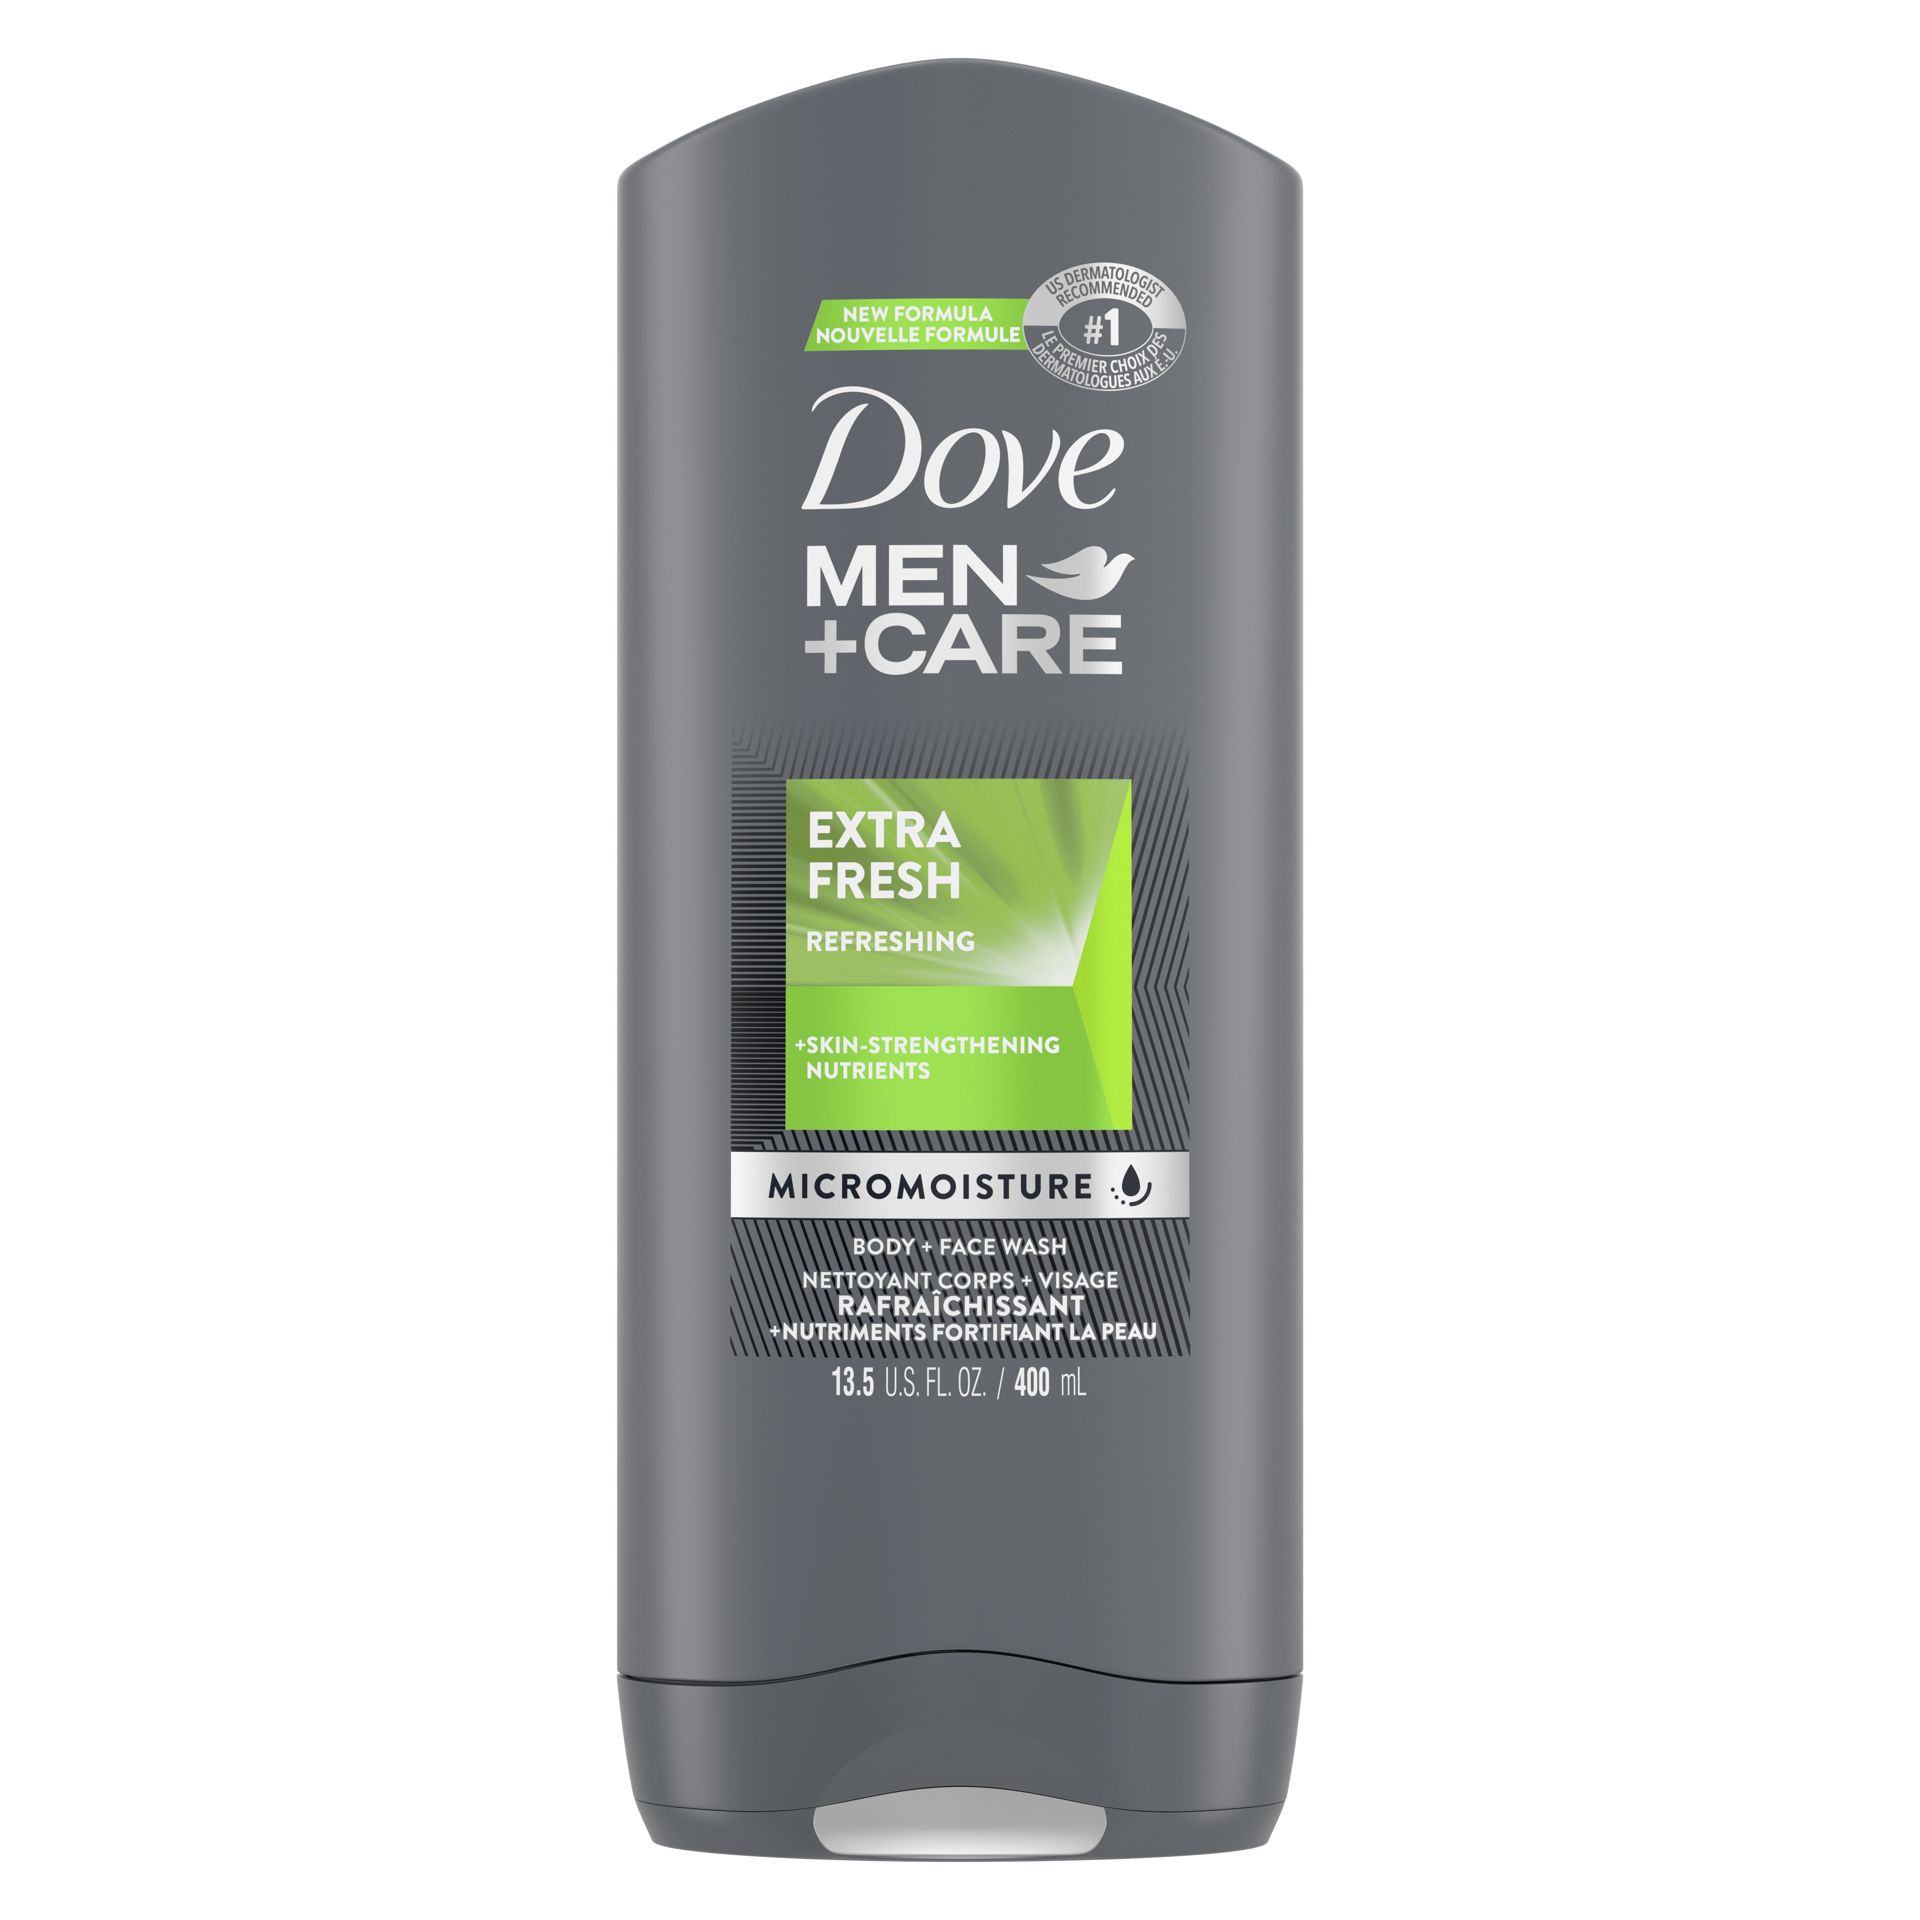 slide 4 of 4, Dove Men+Care Dove Refreshing Extra Fresh Body and Face Wash, 13.5 fl oz